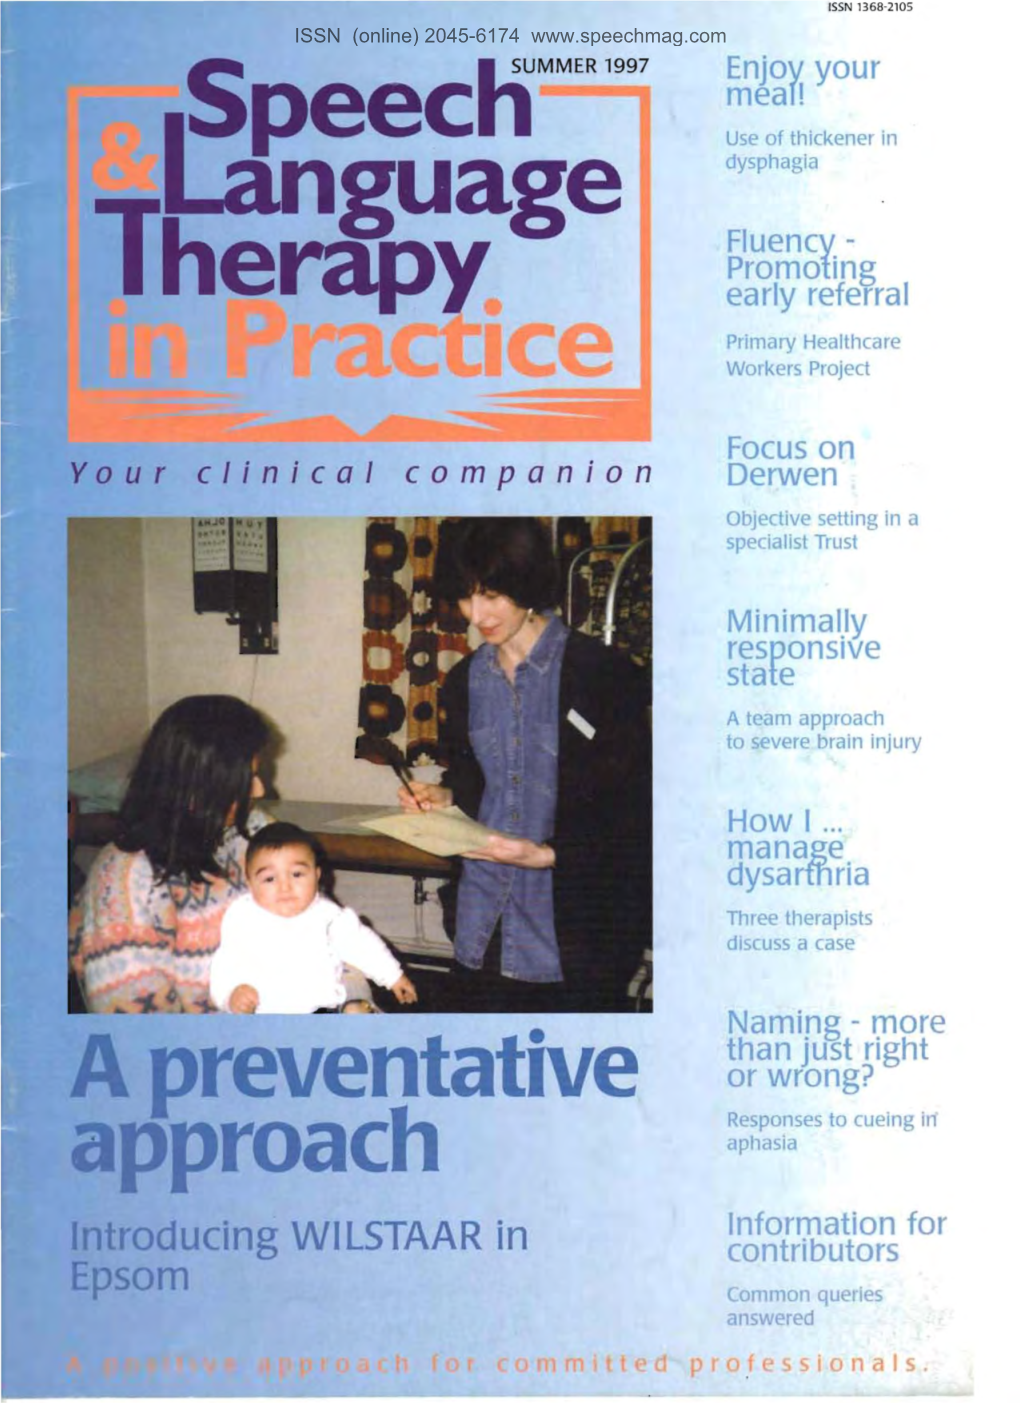 Therapy Early Referral Primary Healtllcare Workers Project